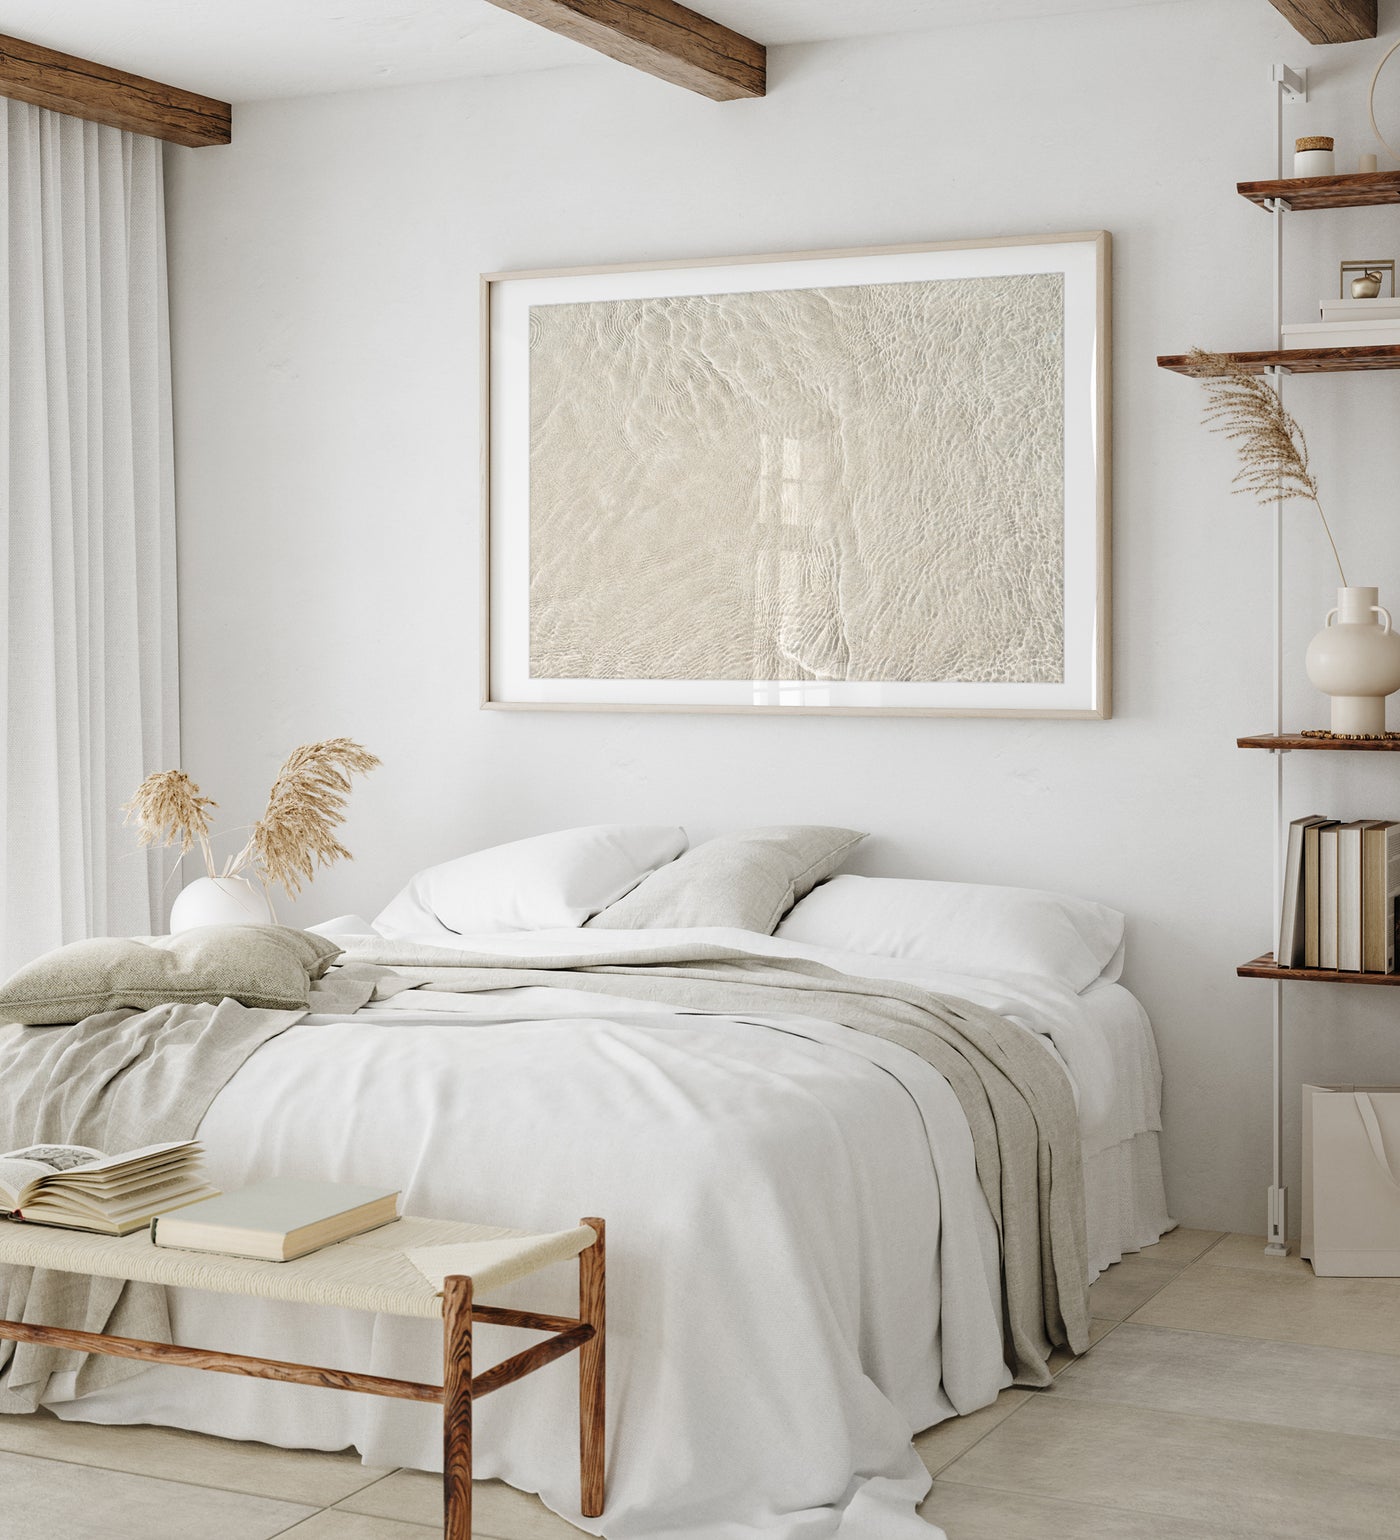 Shallow Water No 26 - Large neutral art print by Cattie Coyle Photography in bedroom